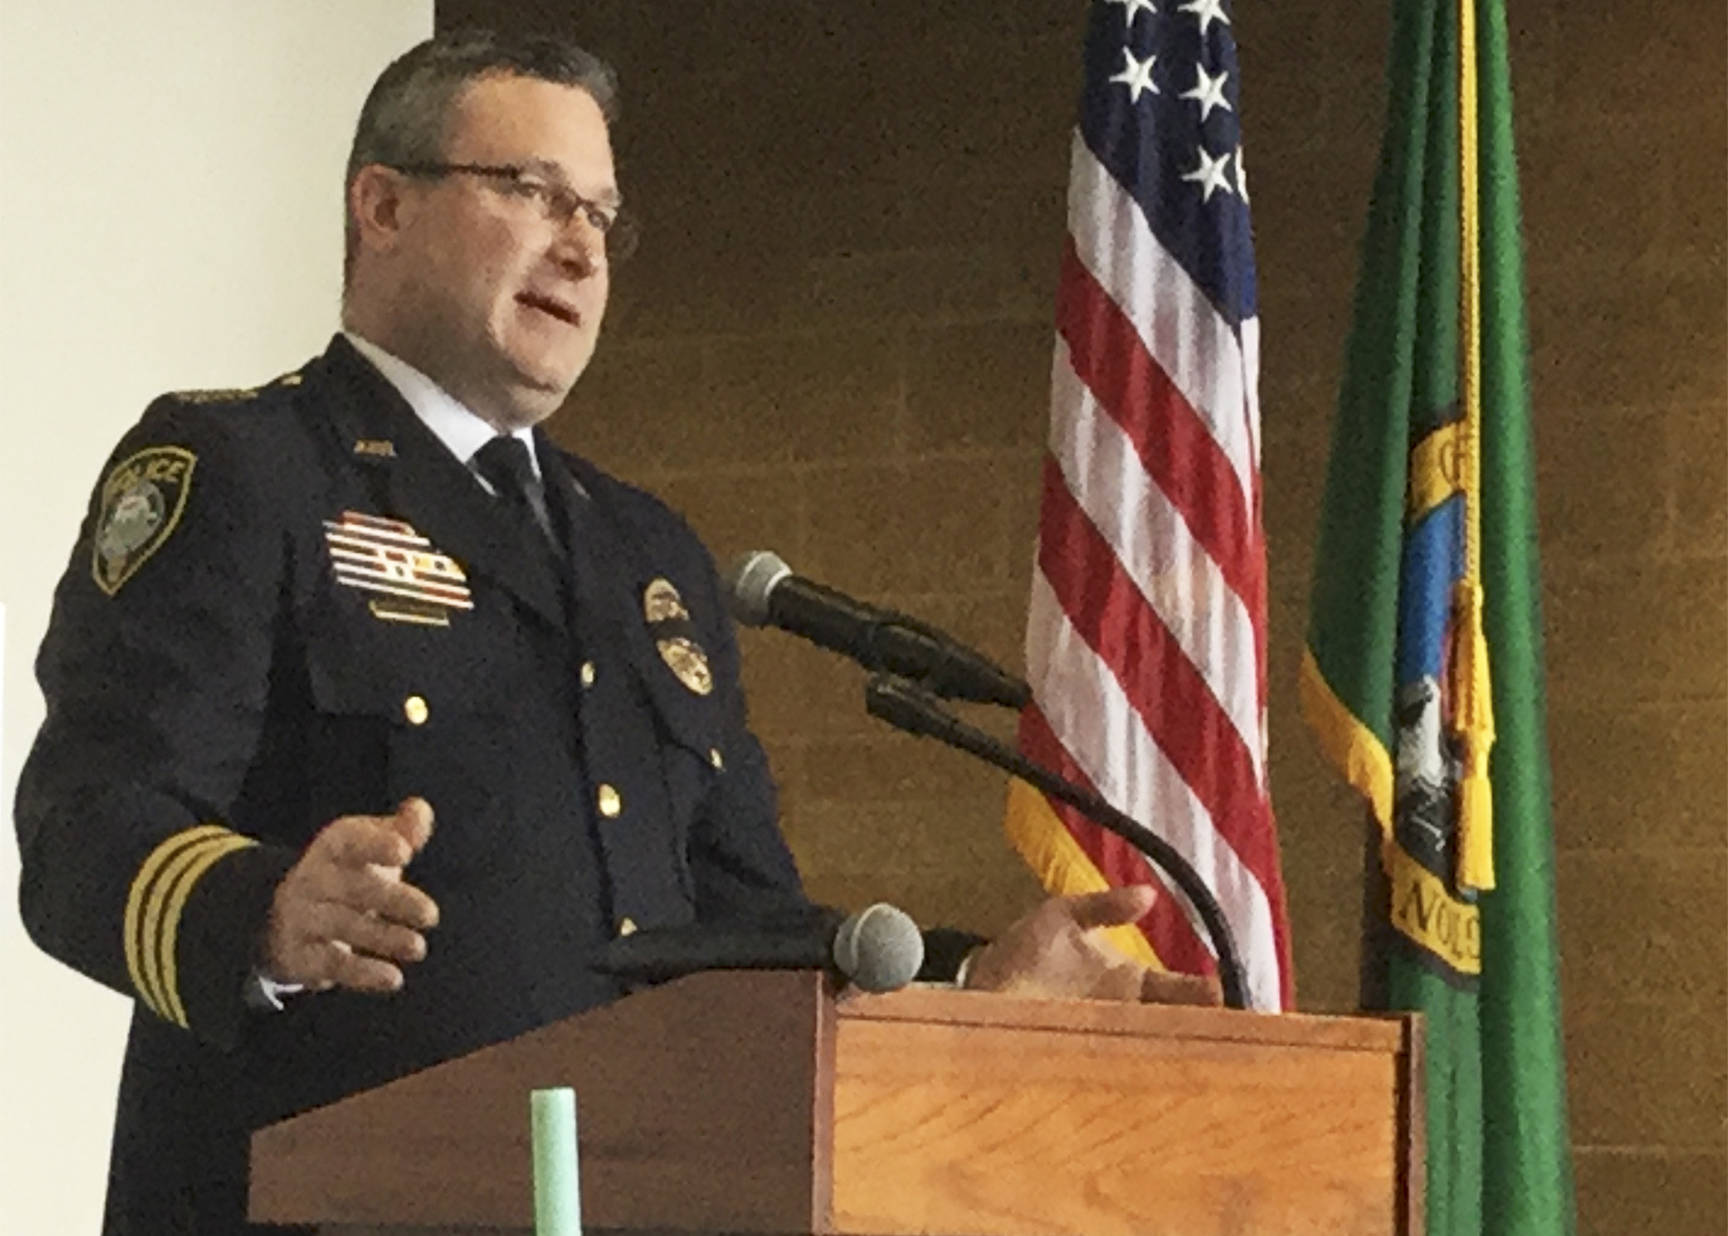 Arlington Police Chief Jonathan Ventura gives a one-year progress report on the city’s Community Outreach Program at a Stilly Valley Chamber of Commerce luncheon.